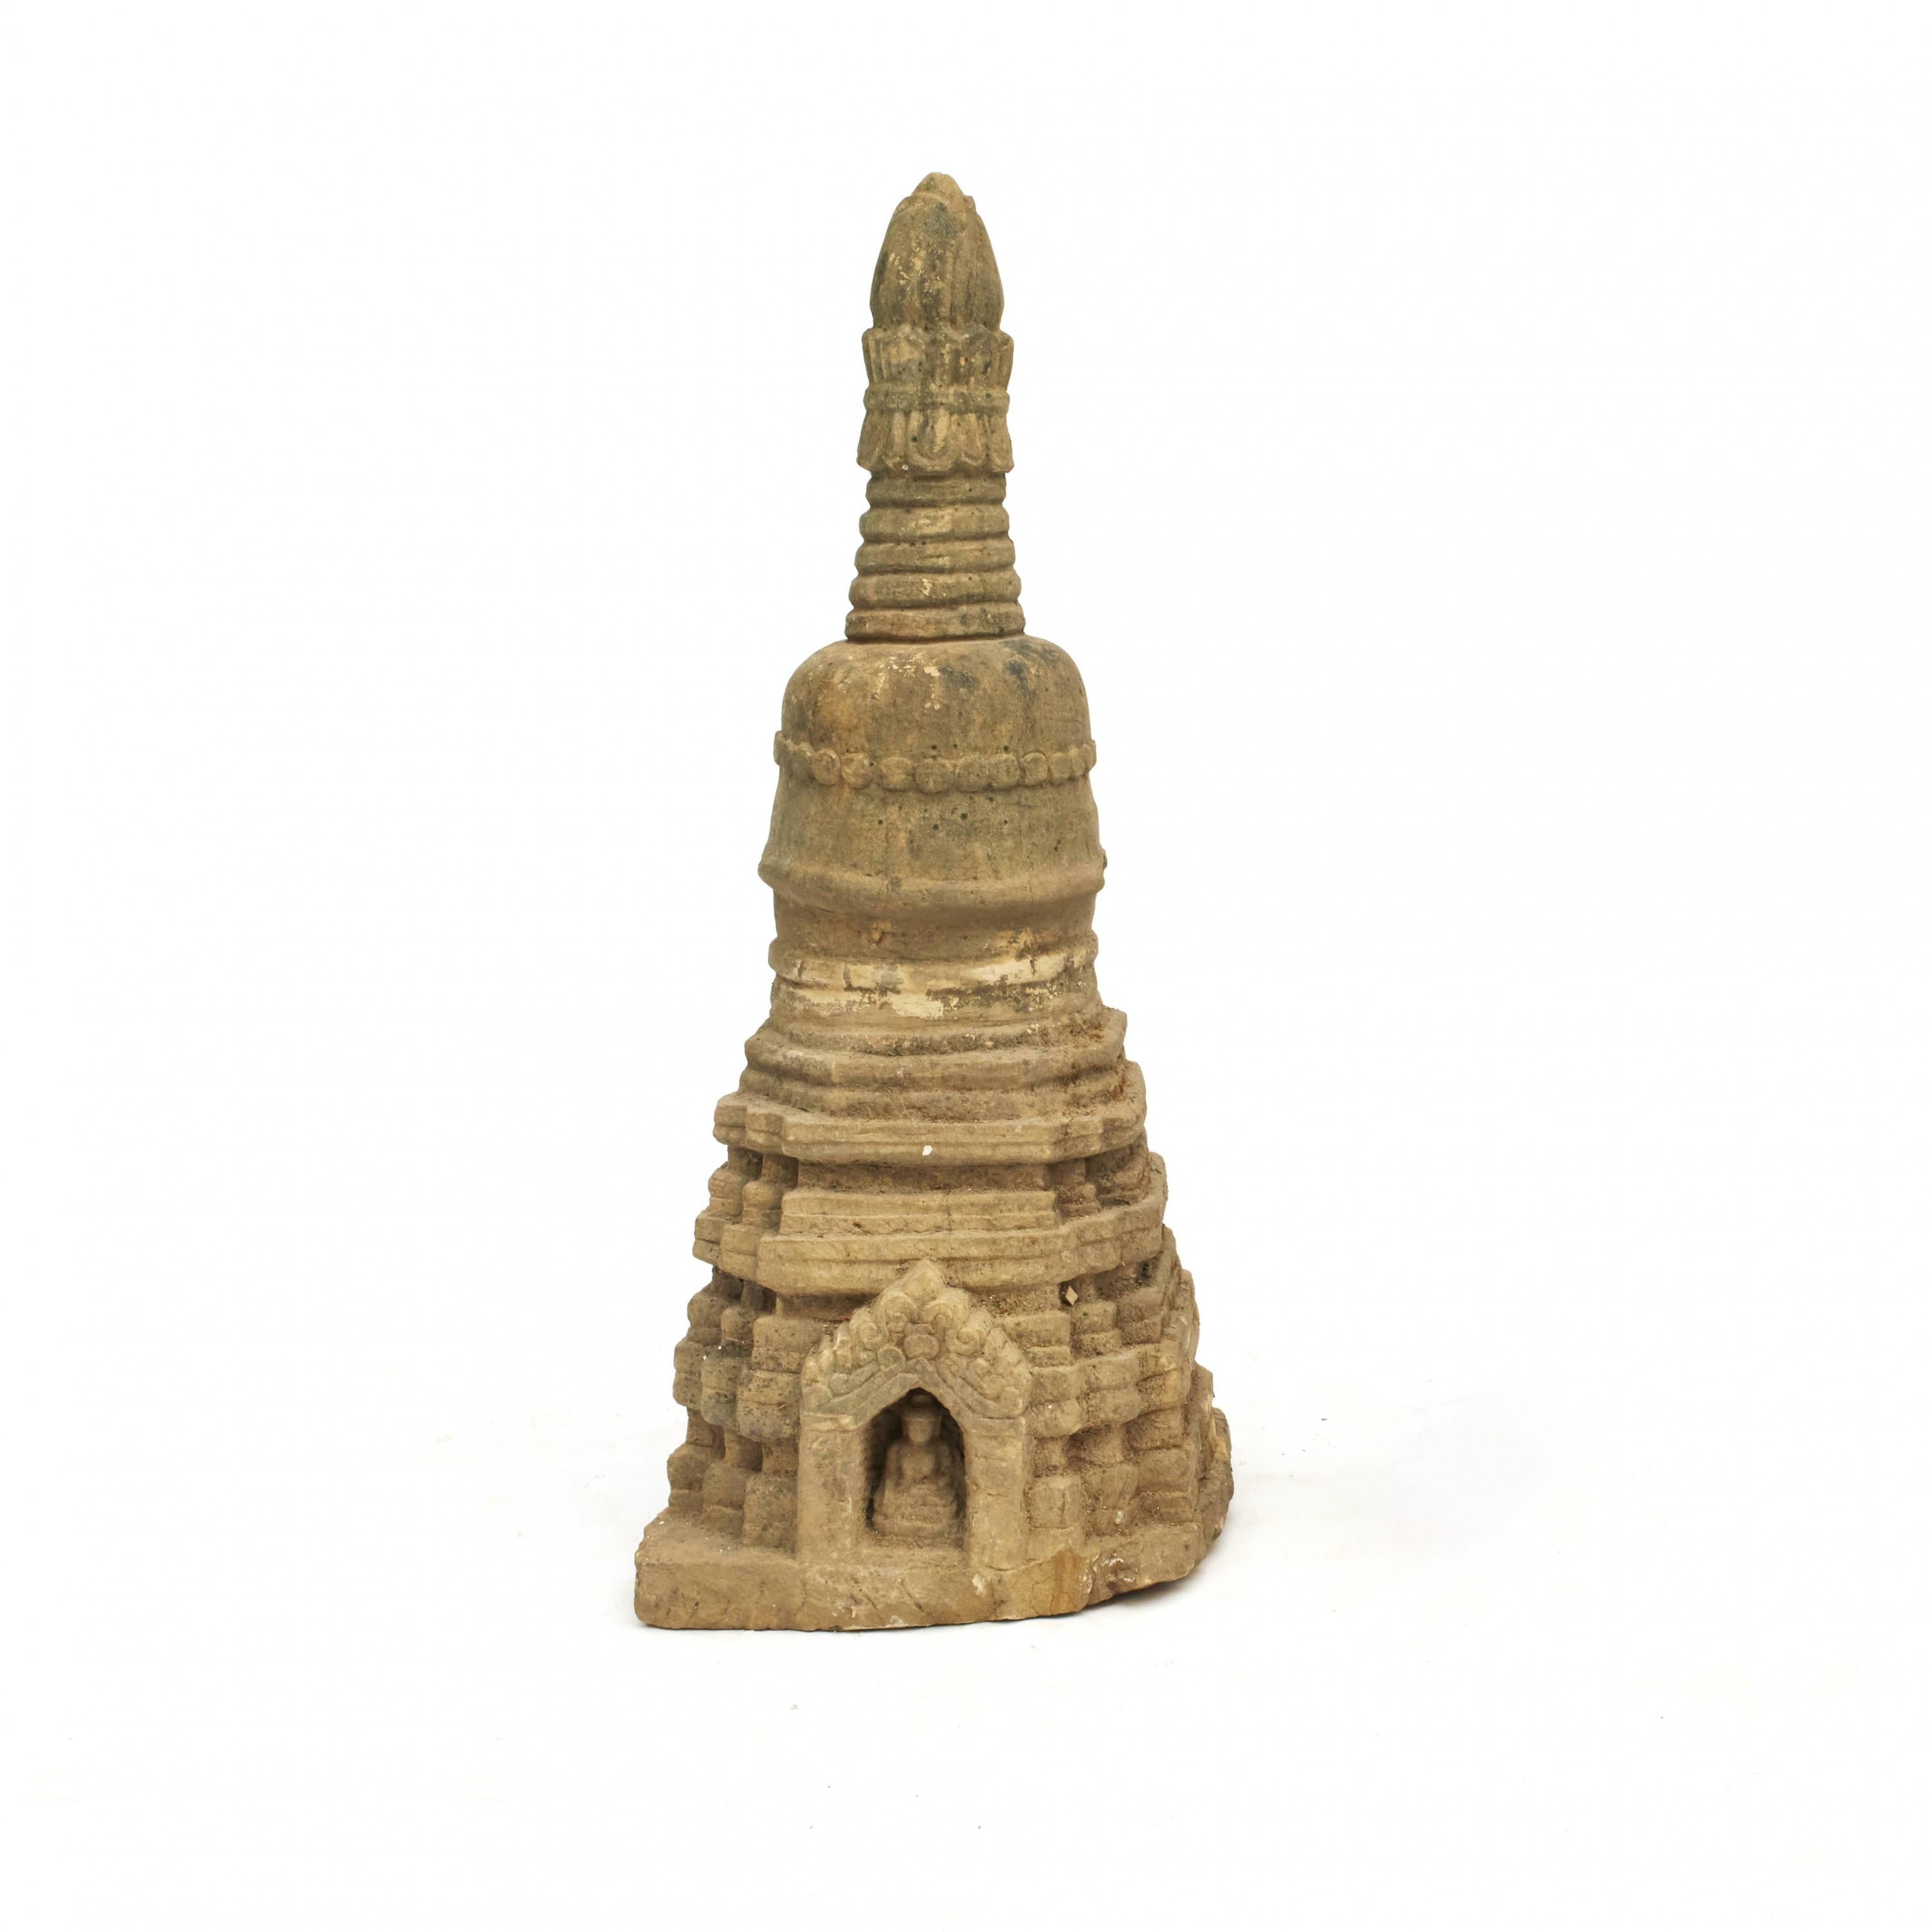 Rare stupa sculpture, 400-600 years old, carved in sandstone. In original untouched, well-preserved condition. From Arakan in Burma.
Typical stupa construction with square base, hemispherical dome and conical spire.
At the base a portal door with